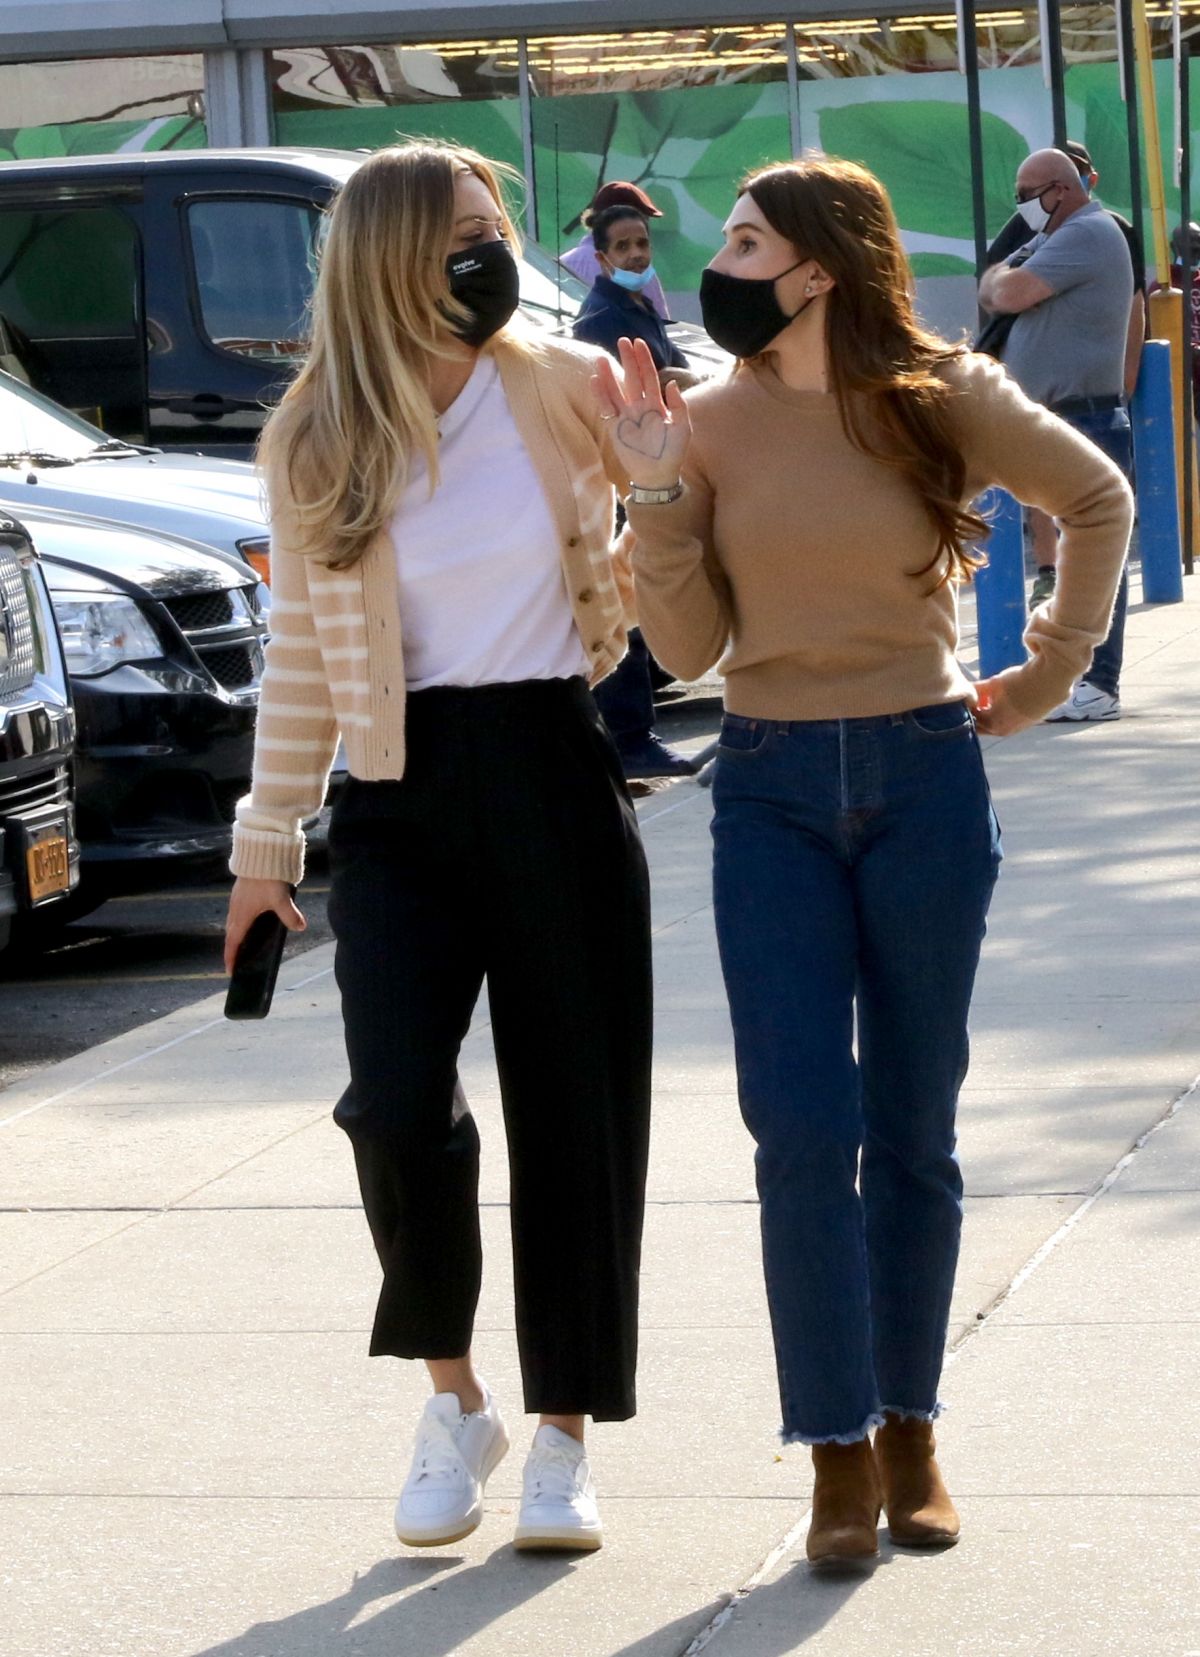 kaley-cuoco-and-zosia-mamet-out-in-astoria-10-11-2020-4.jpg